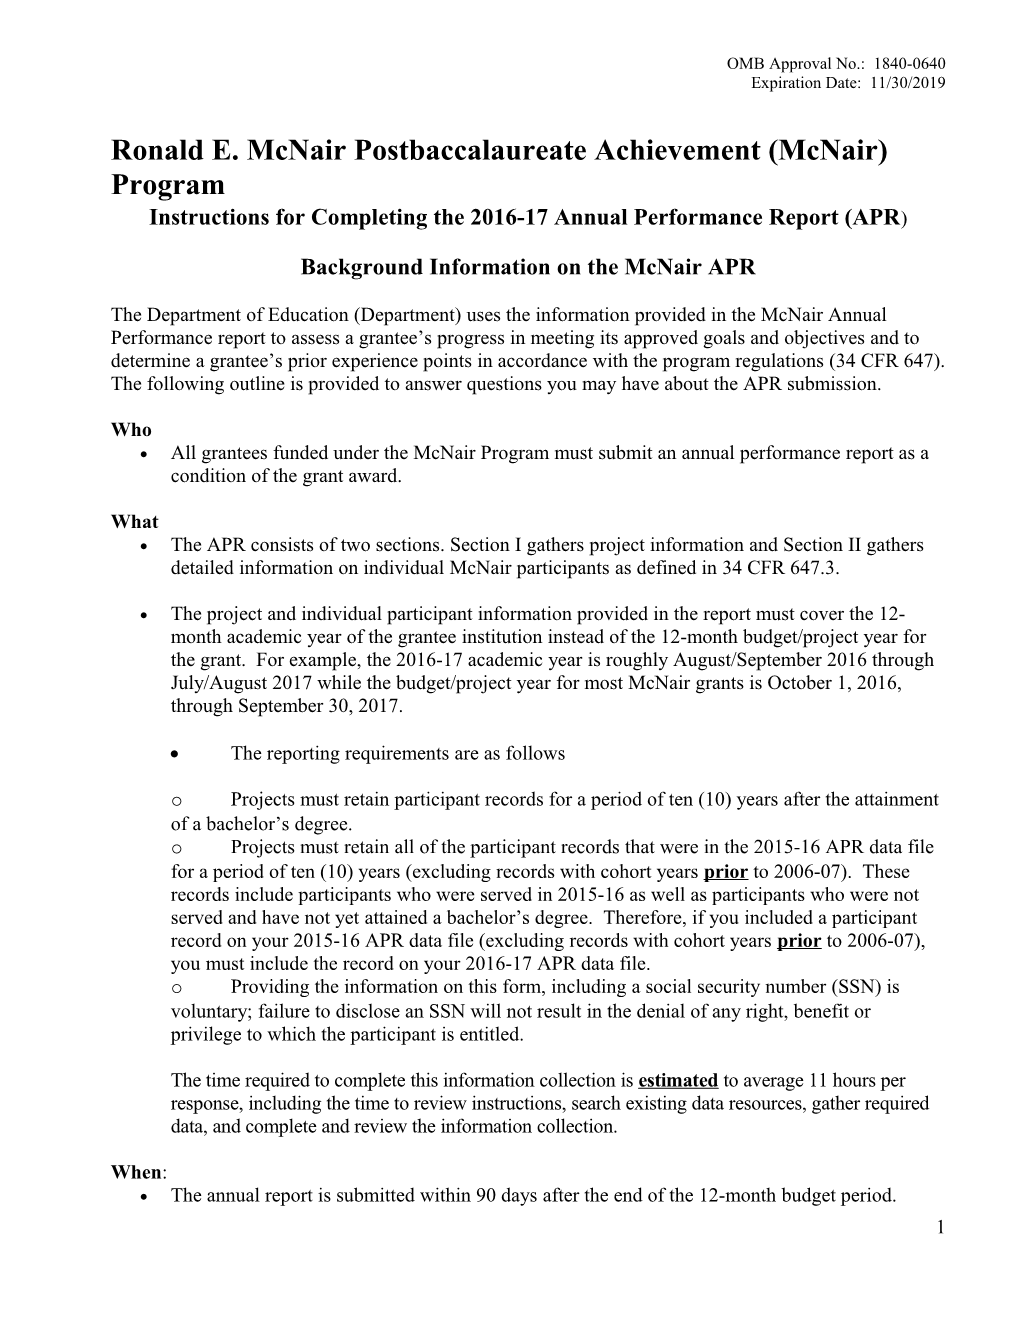 2014-2015 Annual Performance Report Instructions for the Ronald Mcnair Program (MS Word)